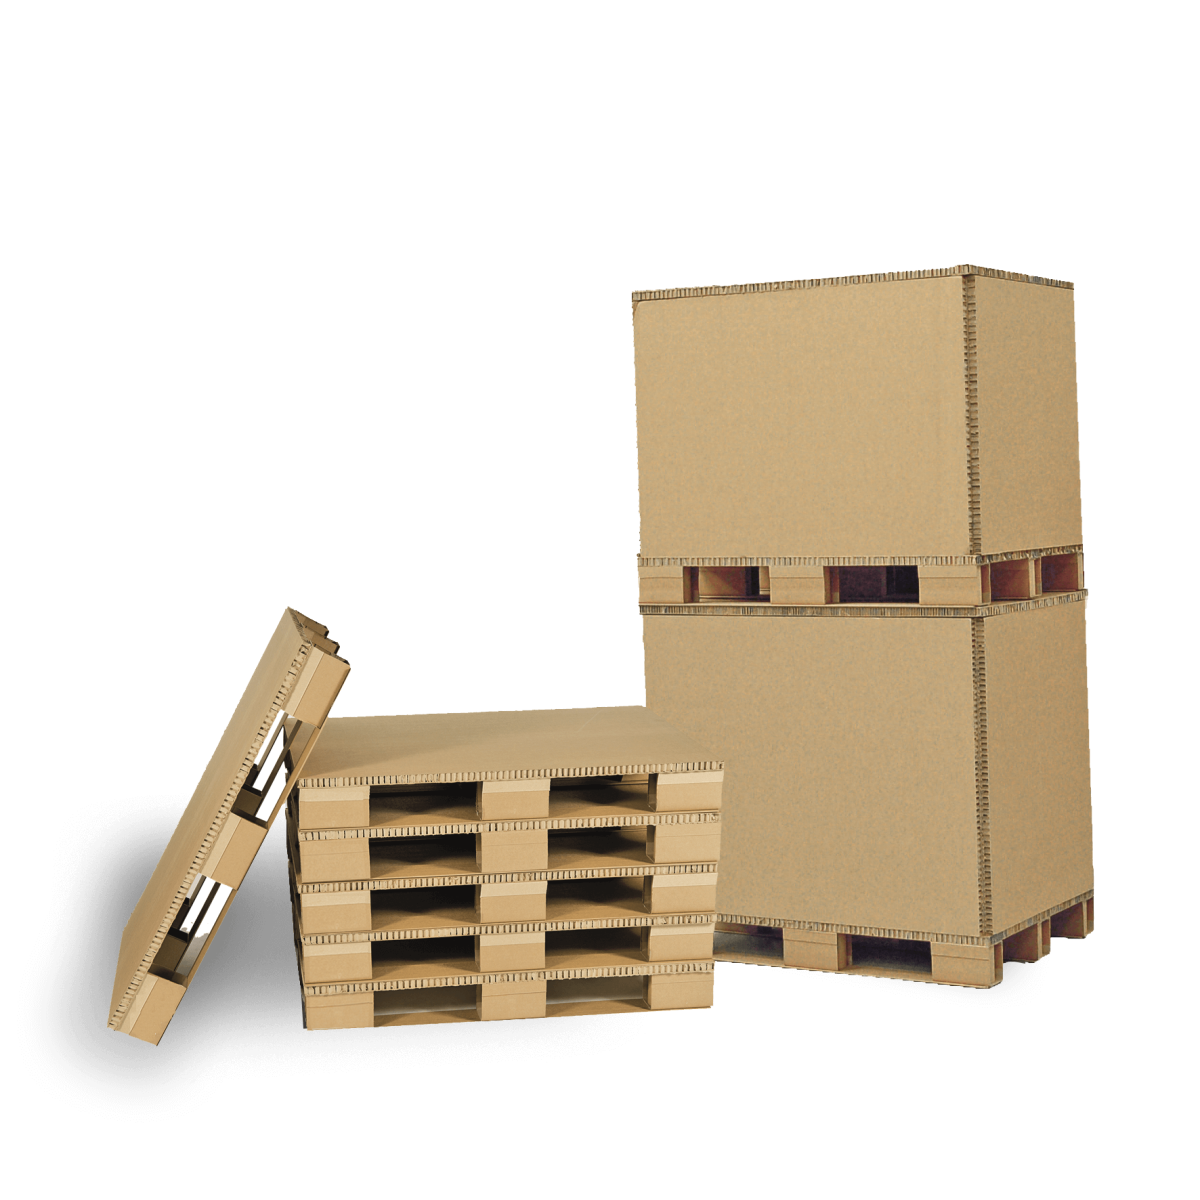 Warehouse logistics sustainable transport honeycomb pallet shipping boxes